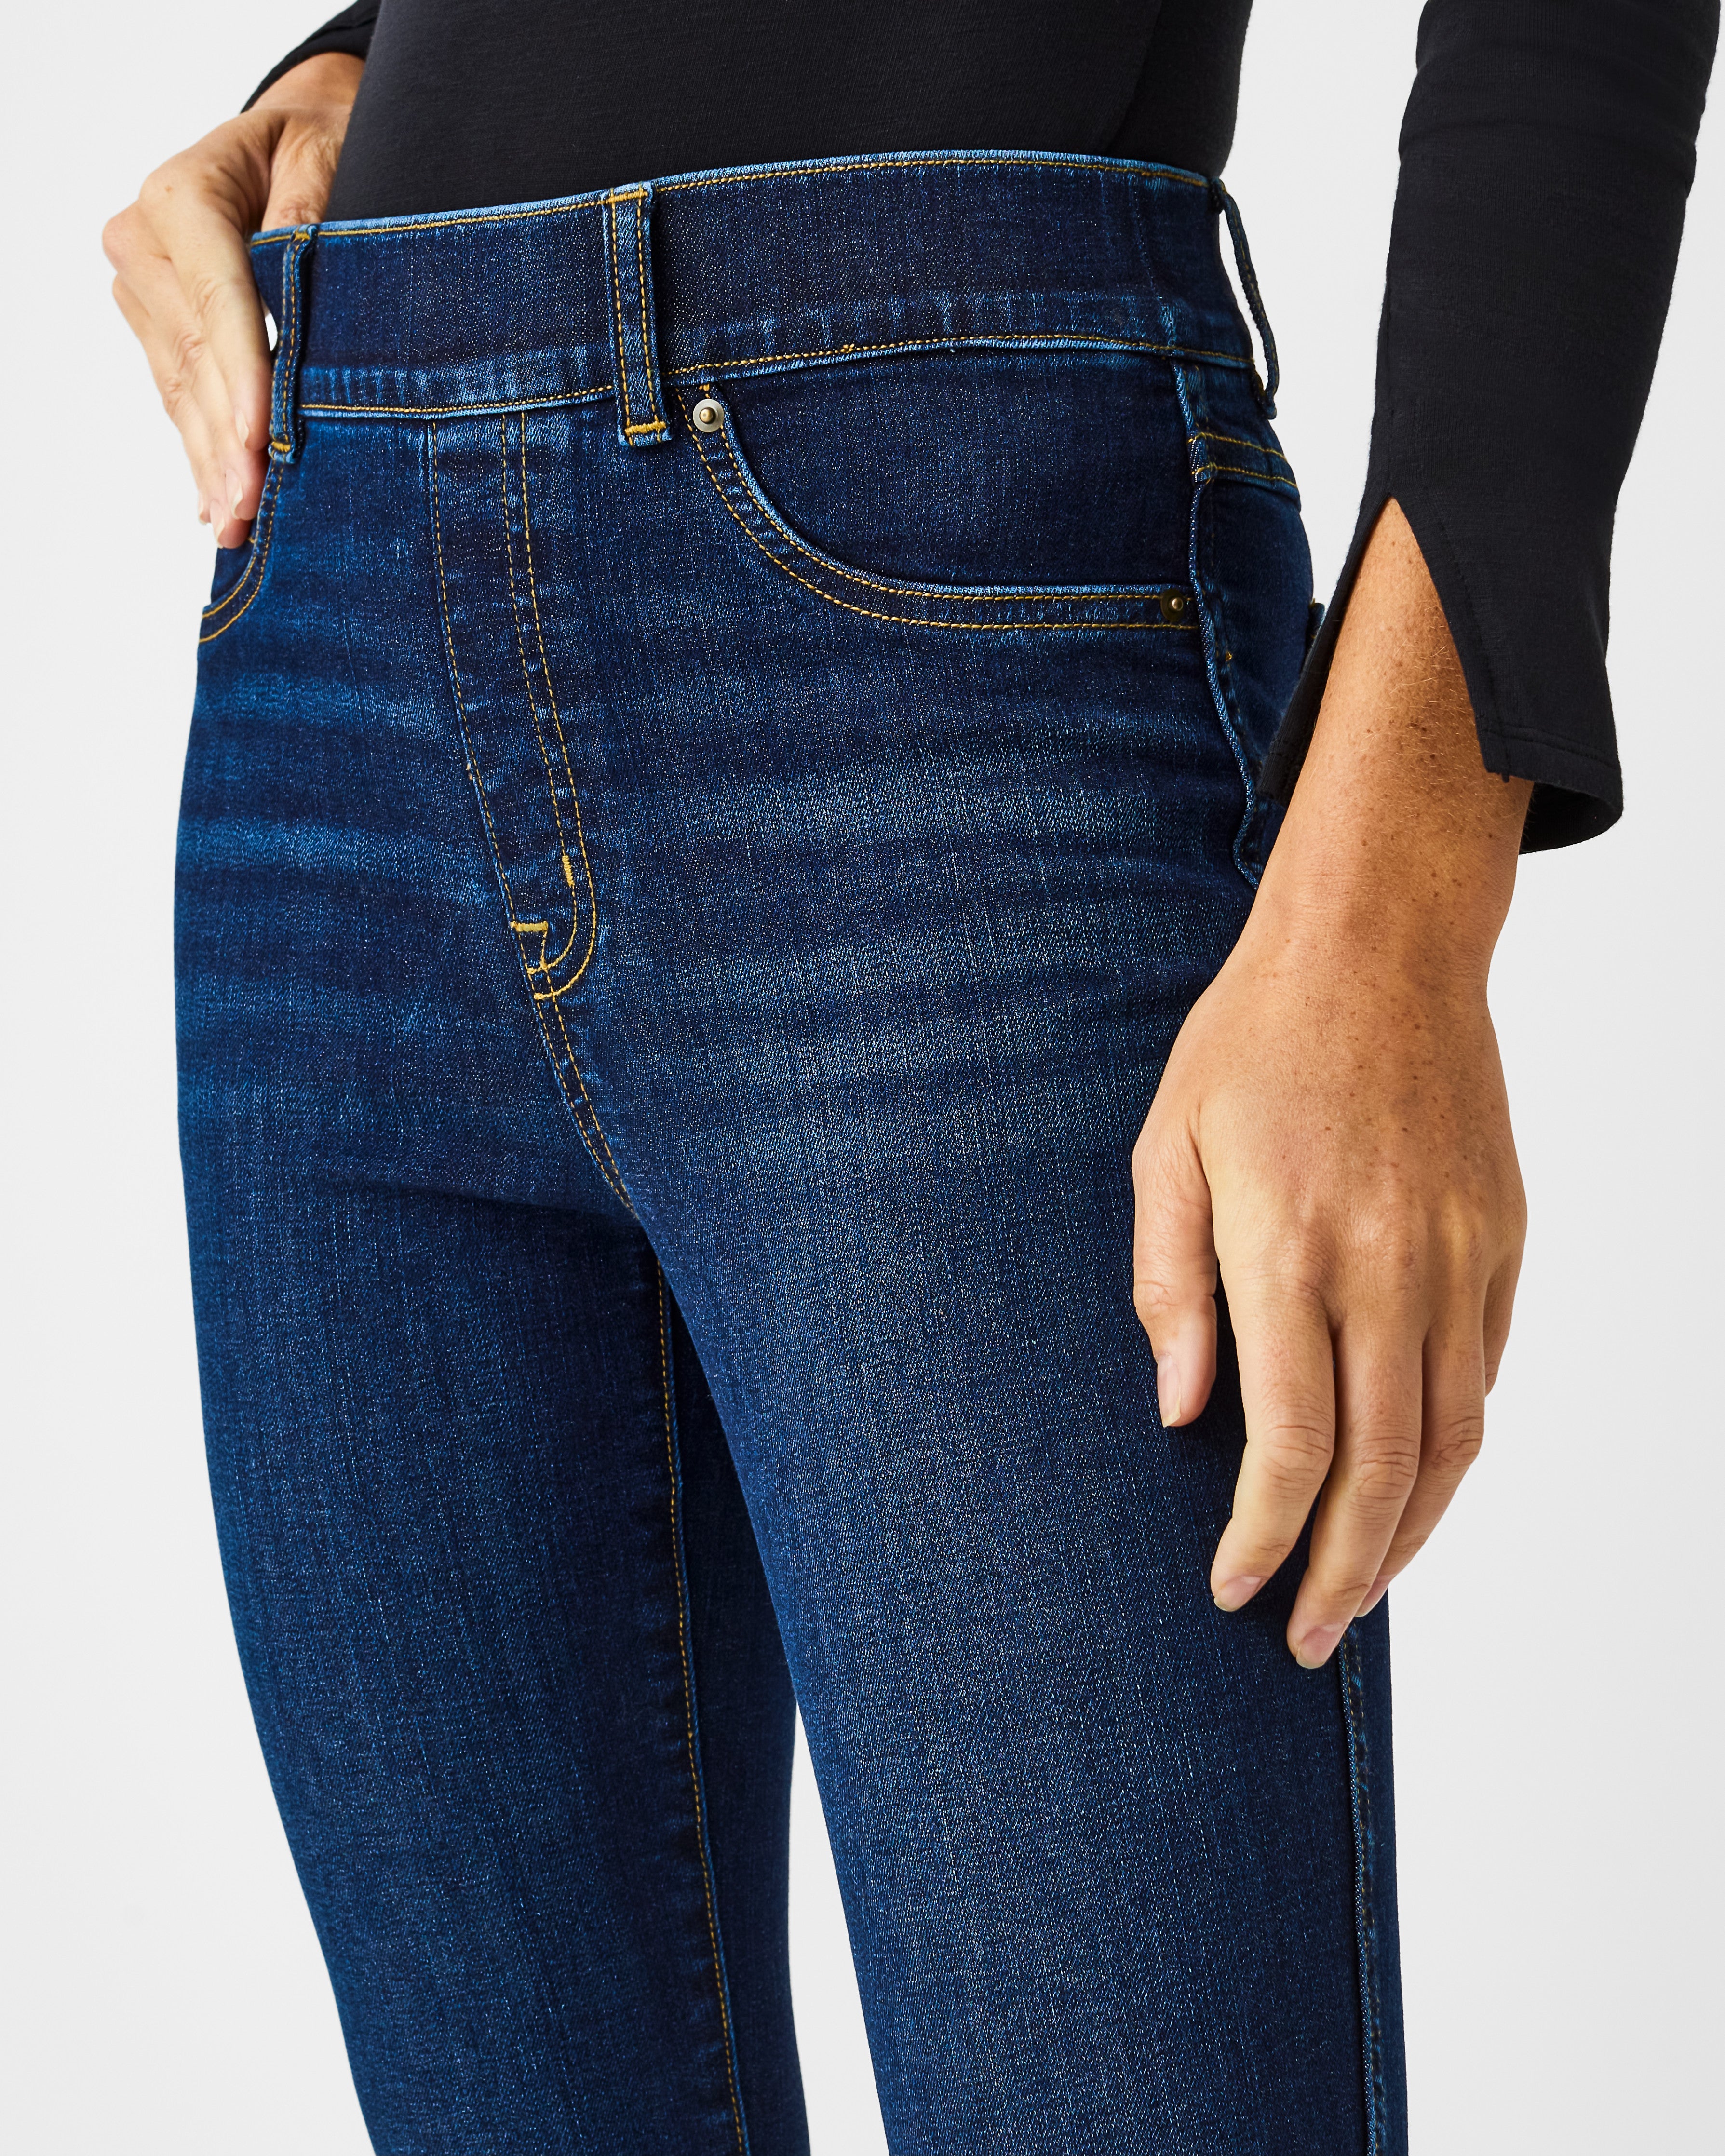 Women's SPANX Skinny Mid Rise Jeans